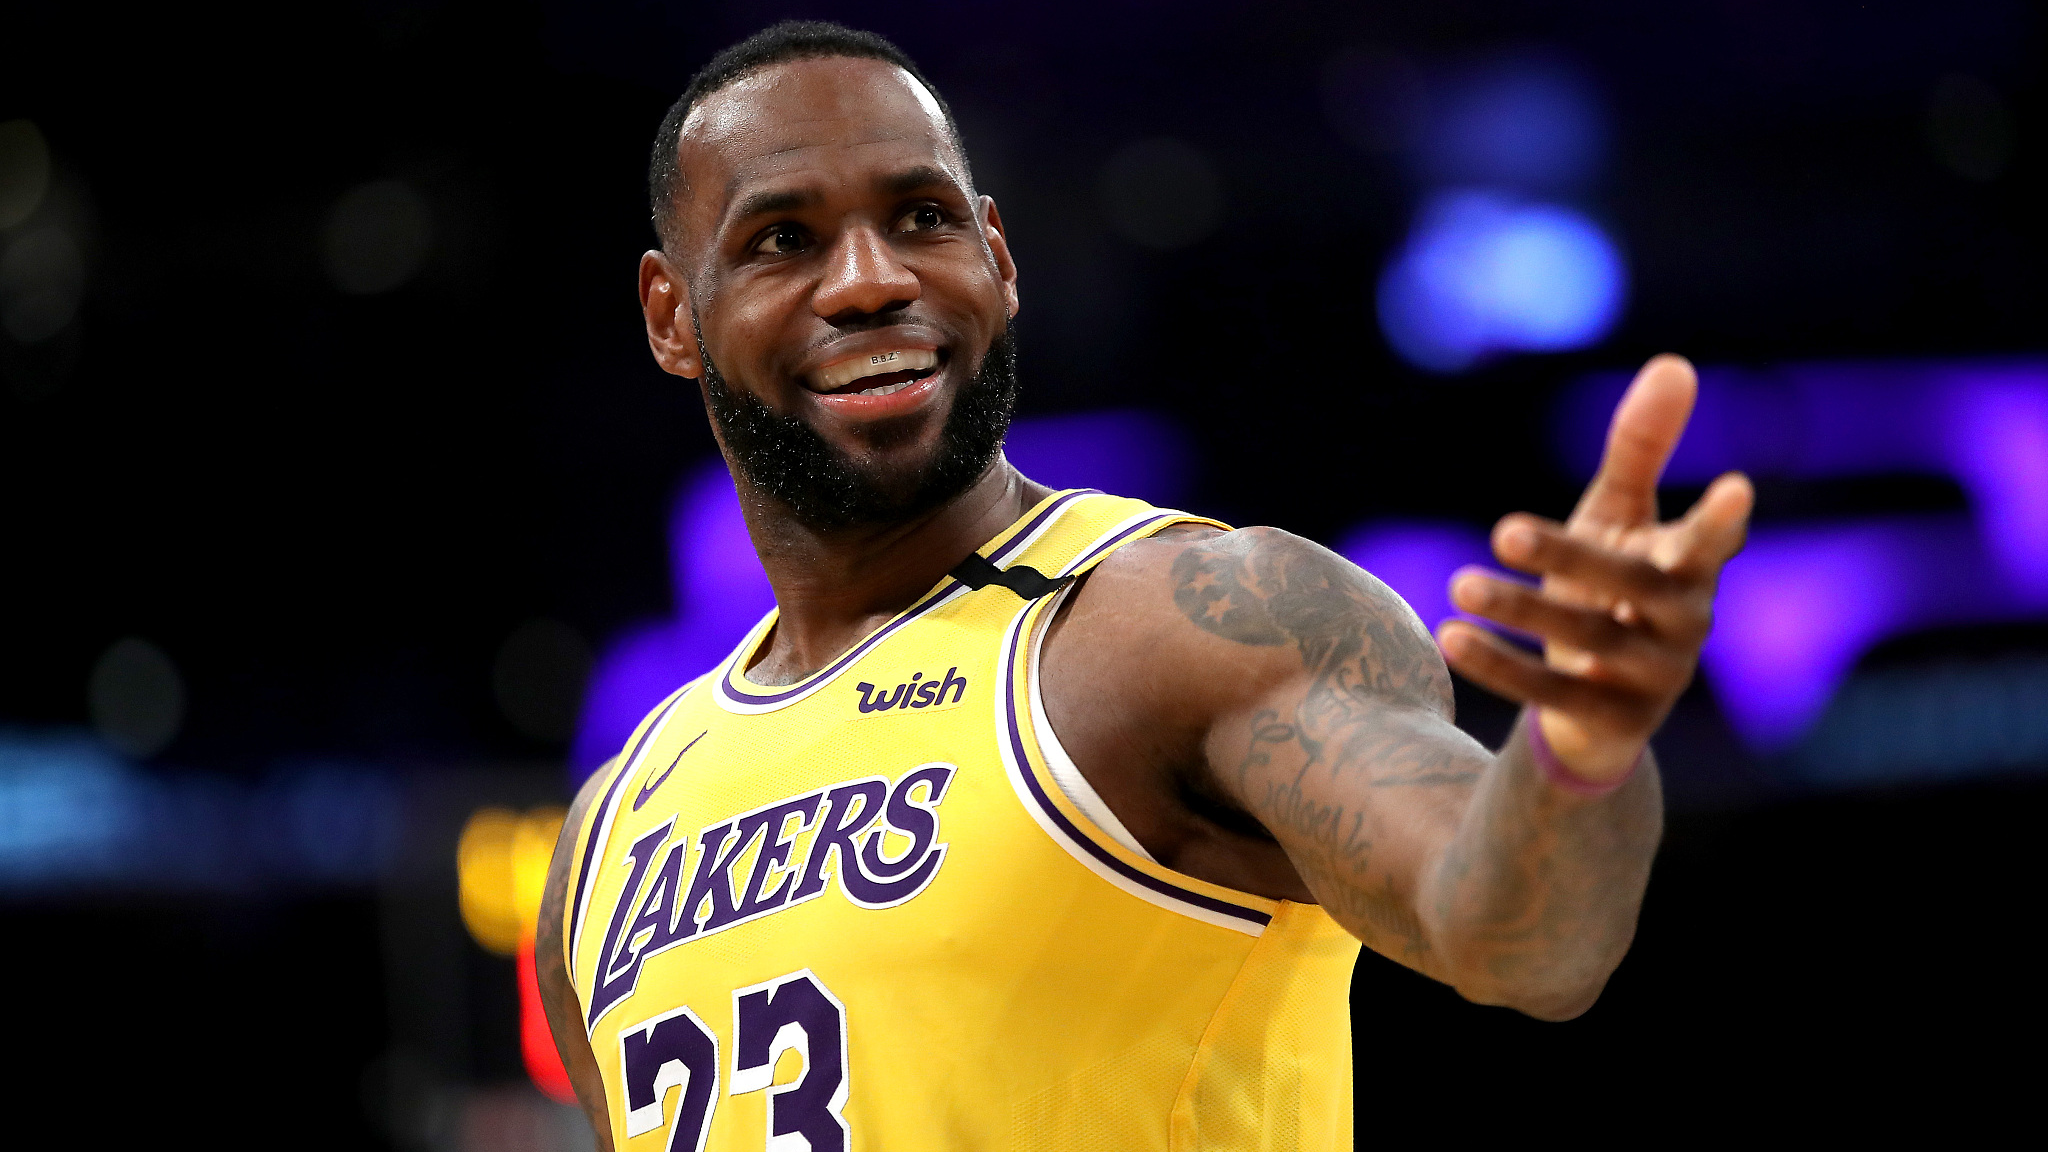 Lakers' LeBron James named Time's 2020 Athlete of the Year - CGTN